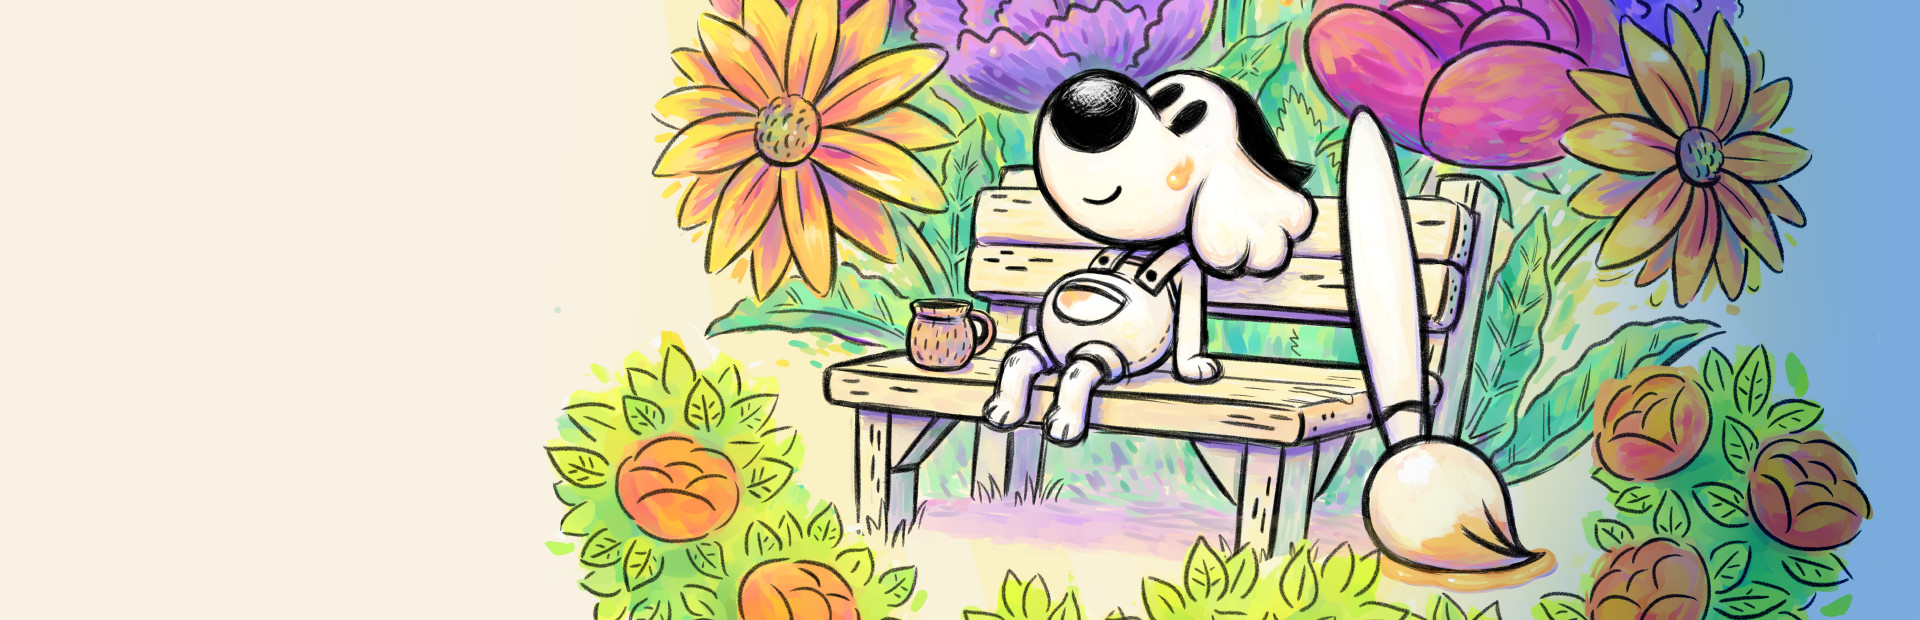 A cartoon dog sits on a wooden bench with a mug and giant paintbrush on both of its sides. The dog is looking up and is surrounded by a colorful array of flora and plant life.